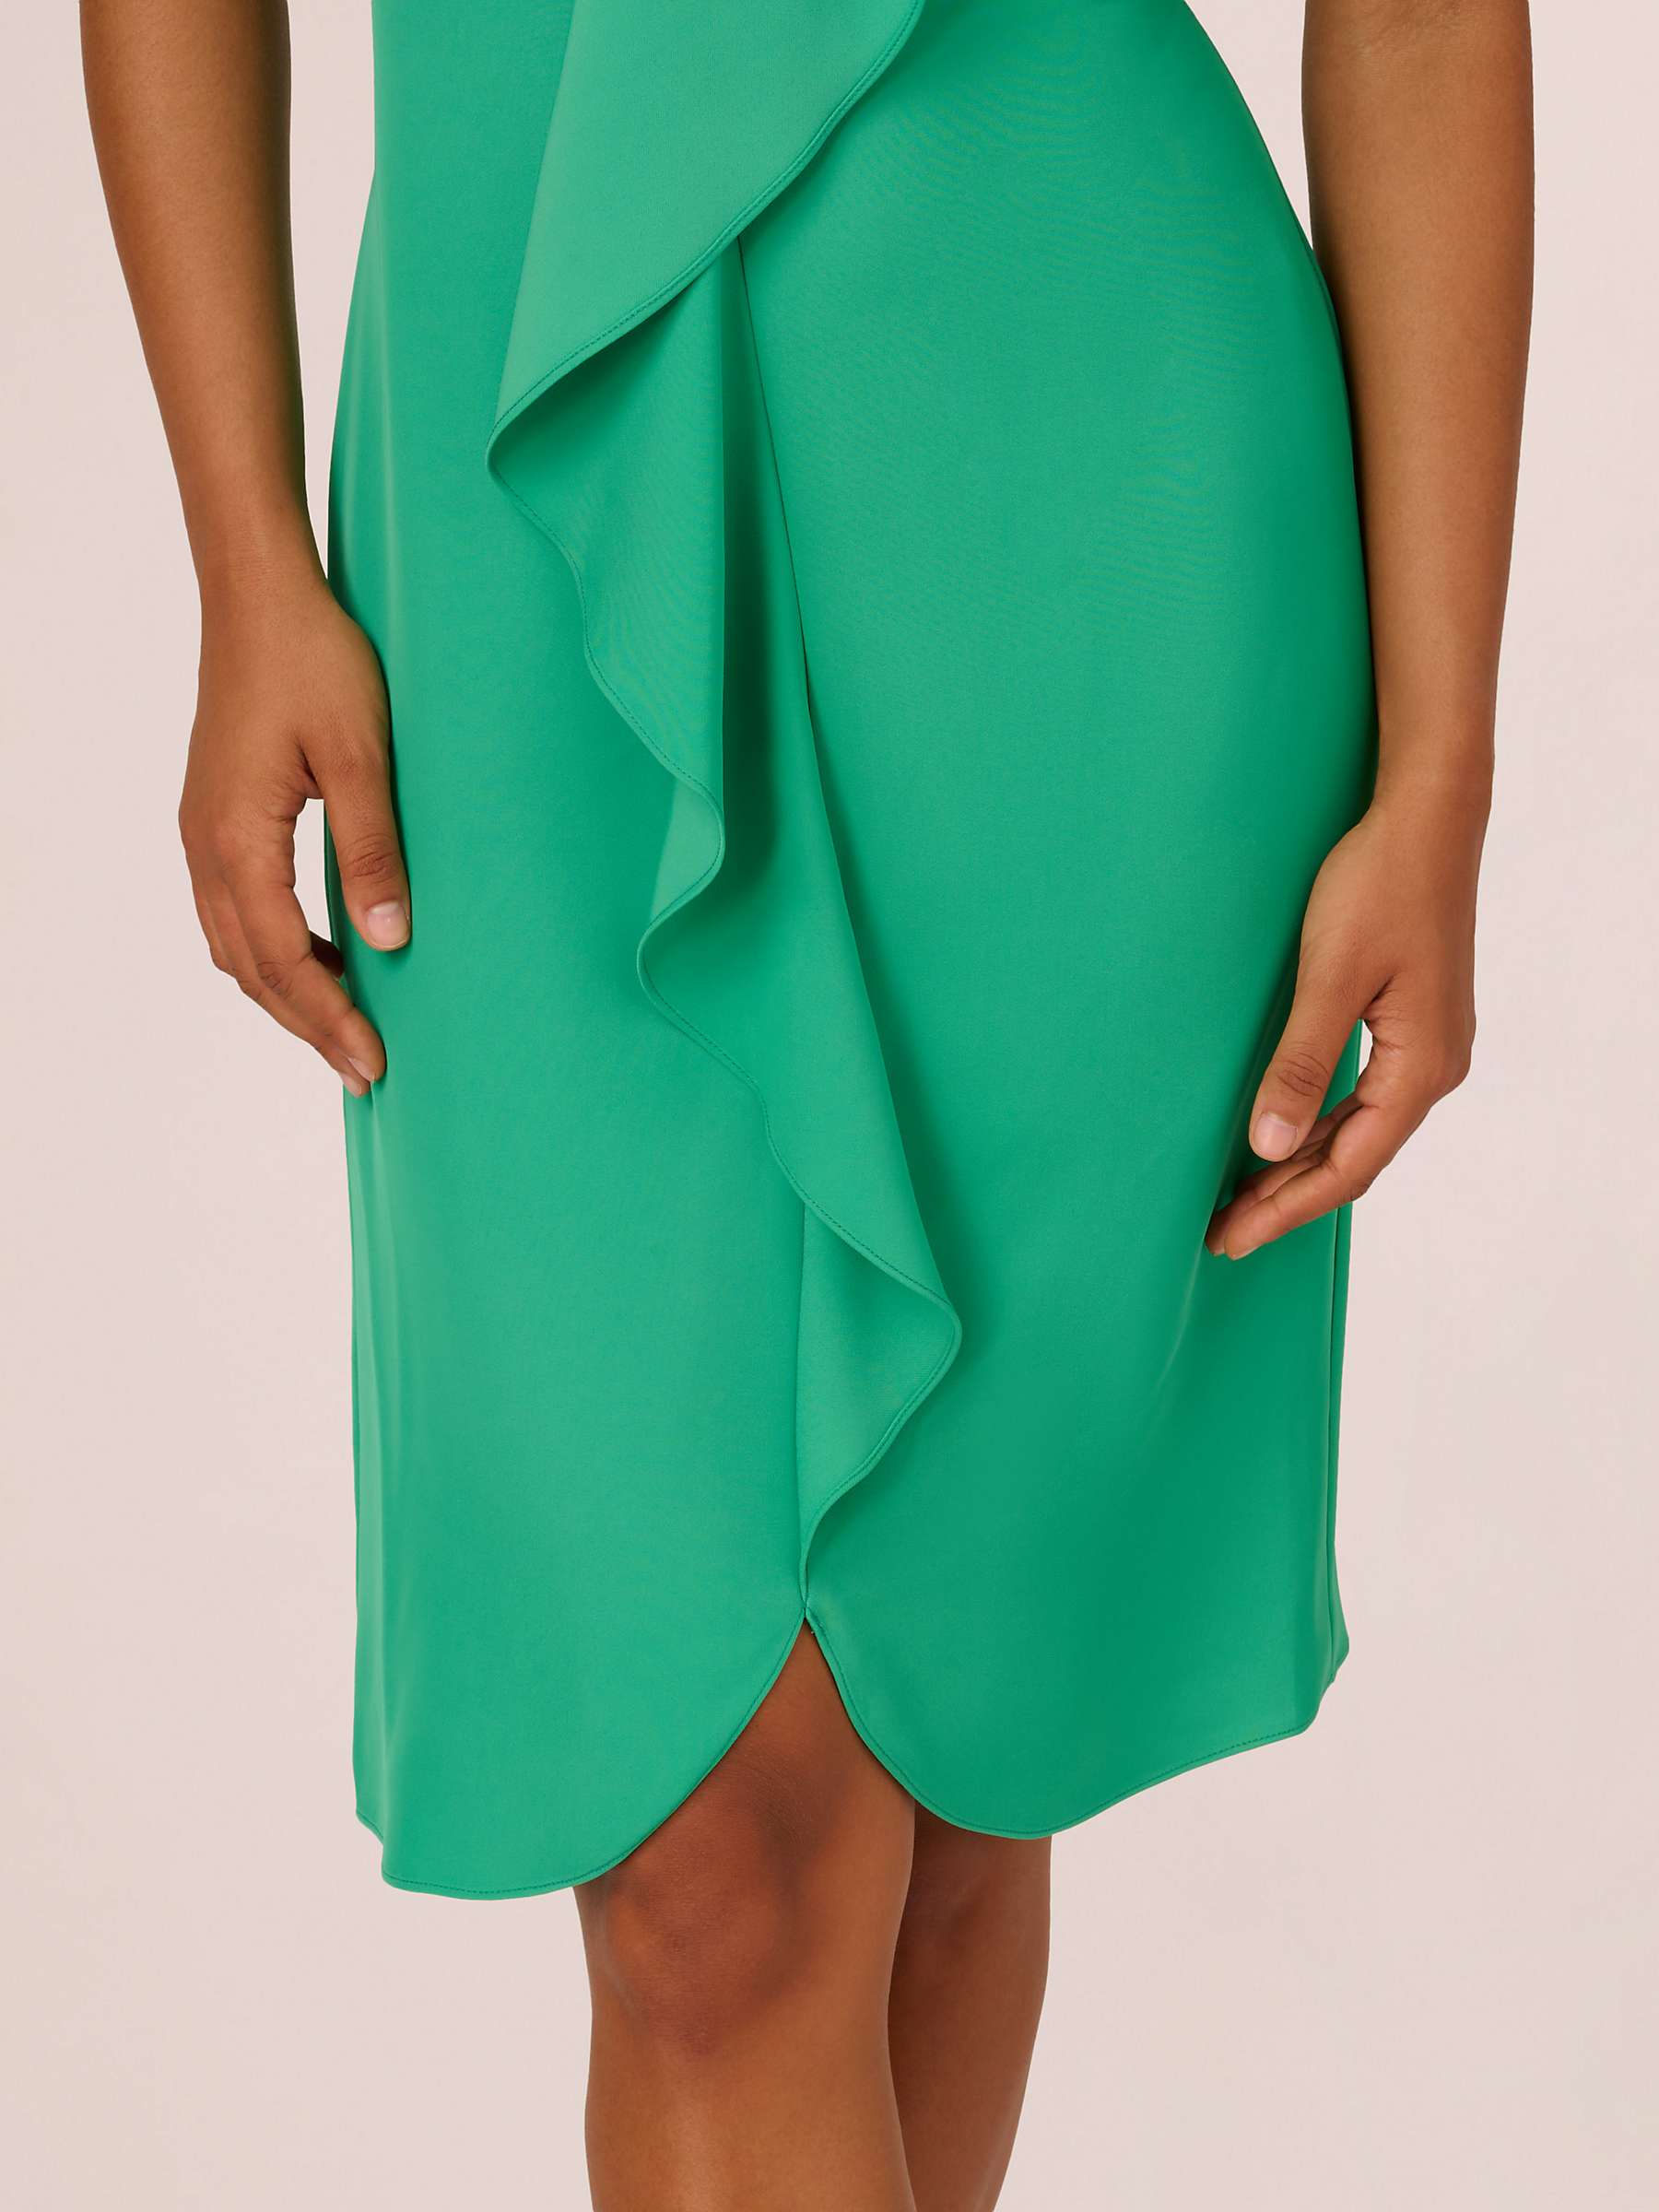 Buy Adrianna Papell Neck Chain Ruffle Dress, Flora Green Online at johnlewis.com